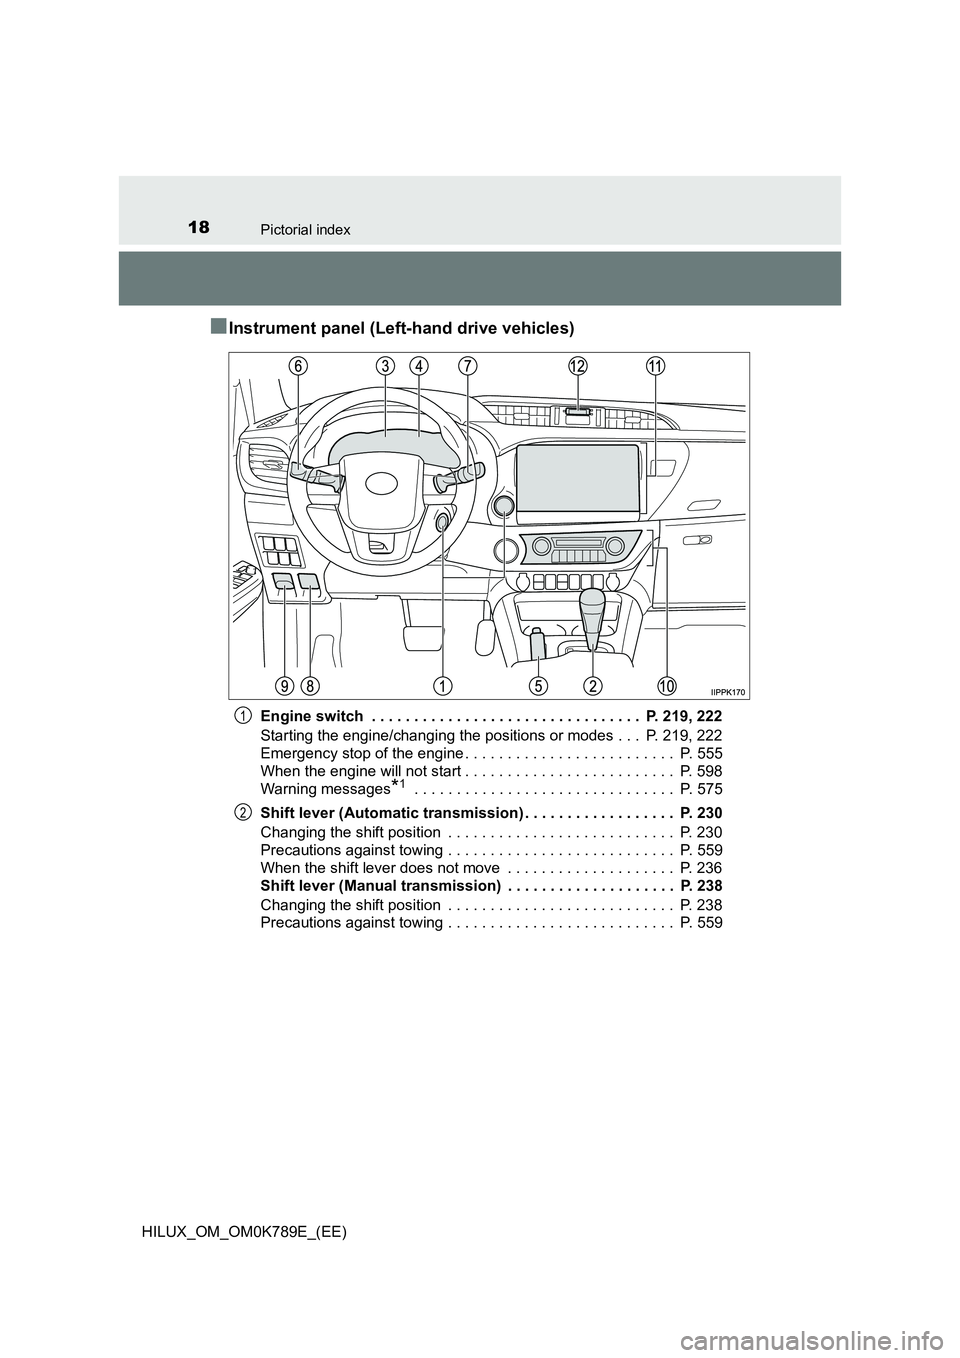 TOYOTA HILUX 2023  Owners Manual 18Pictorial index
HILUX_OM_OM0K789E_(EE)
■Instrument panel (Left-hand drive vehicles)
Engine switch  . . . . . . . . . . . . . . . . . . . . . . . . . . . . . . . .  P. 219, 222 
Starting the engine